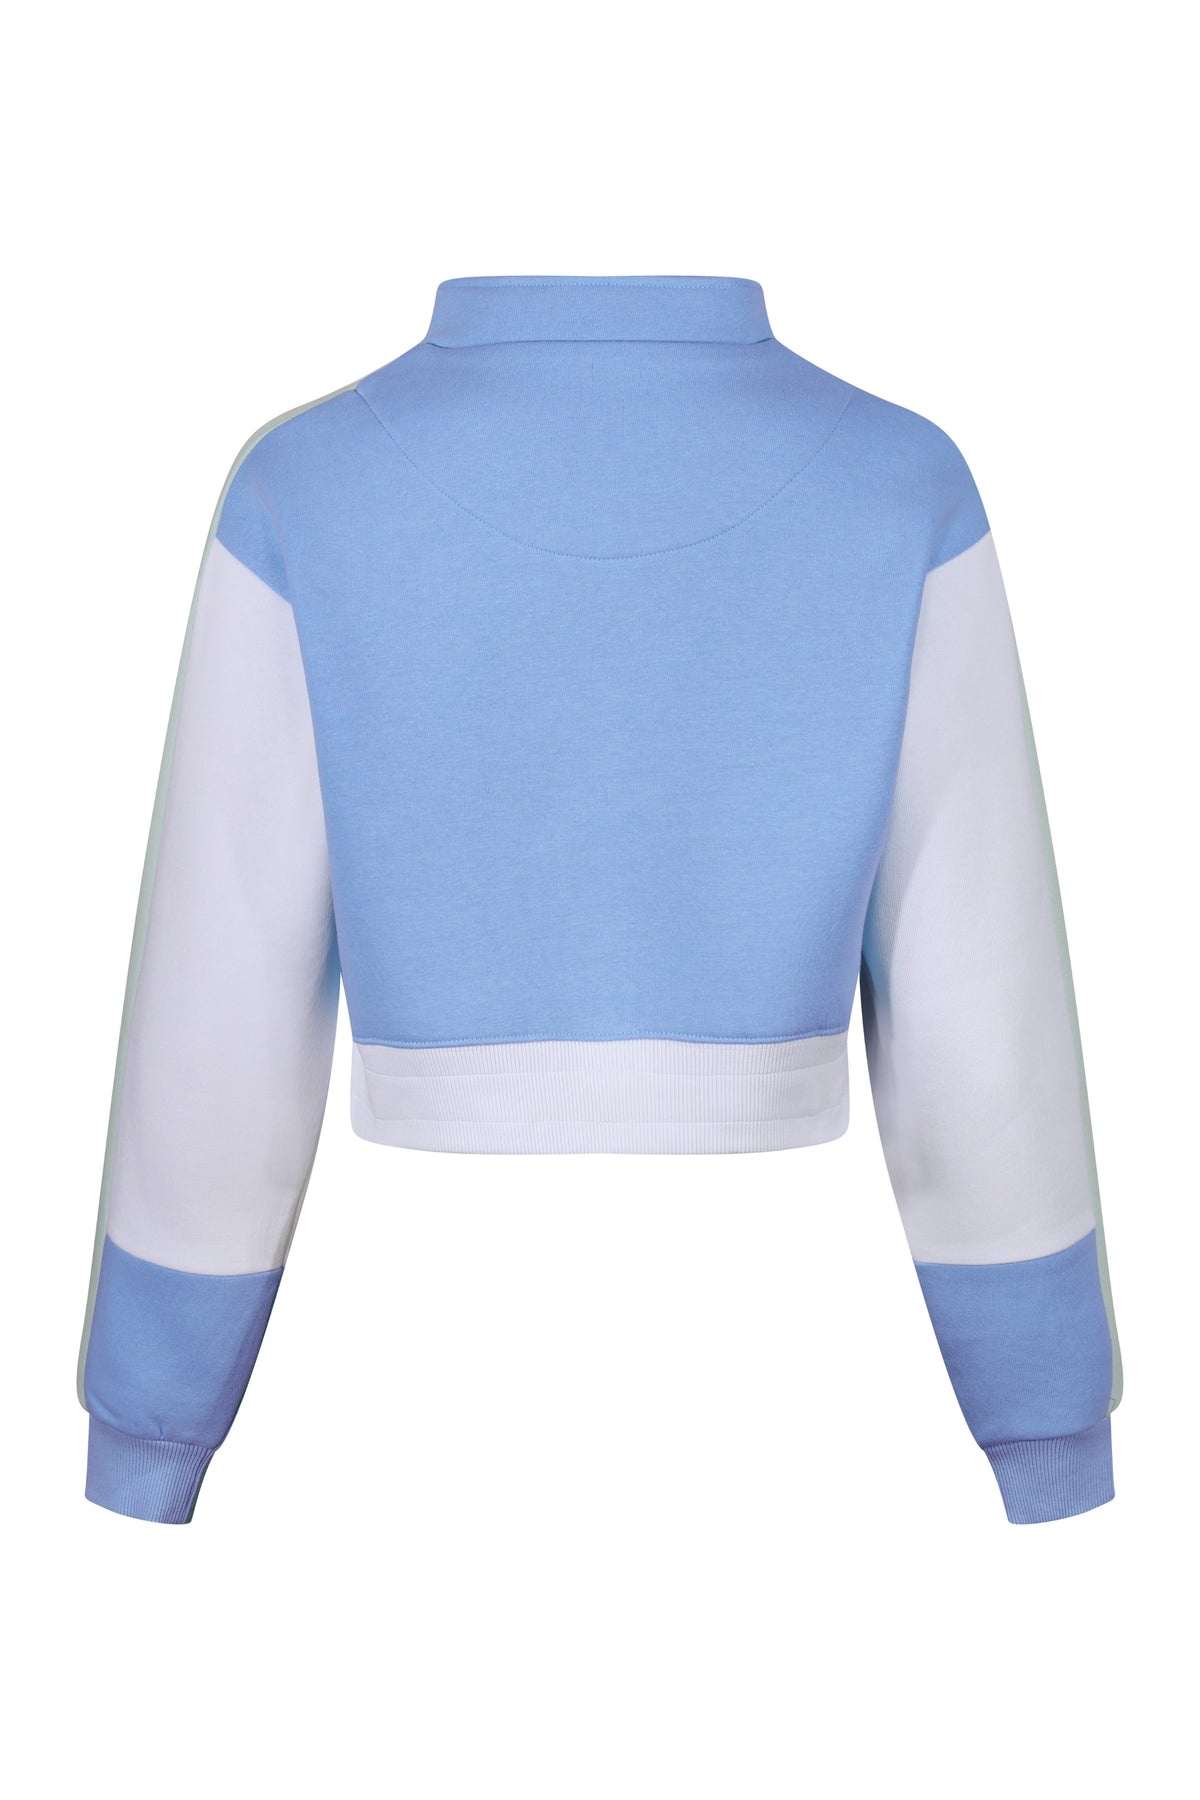 Saltern Cropped Quarter Zip Sweatshirt - Blue - Whale Of A Time Clothing